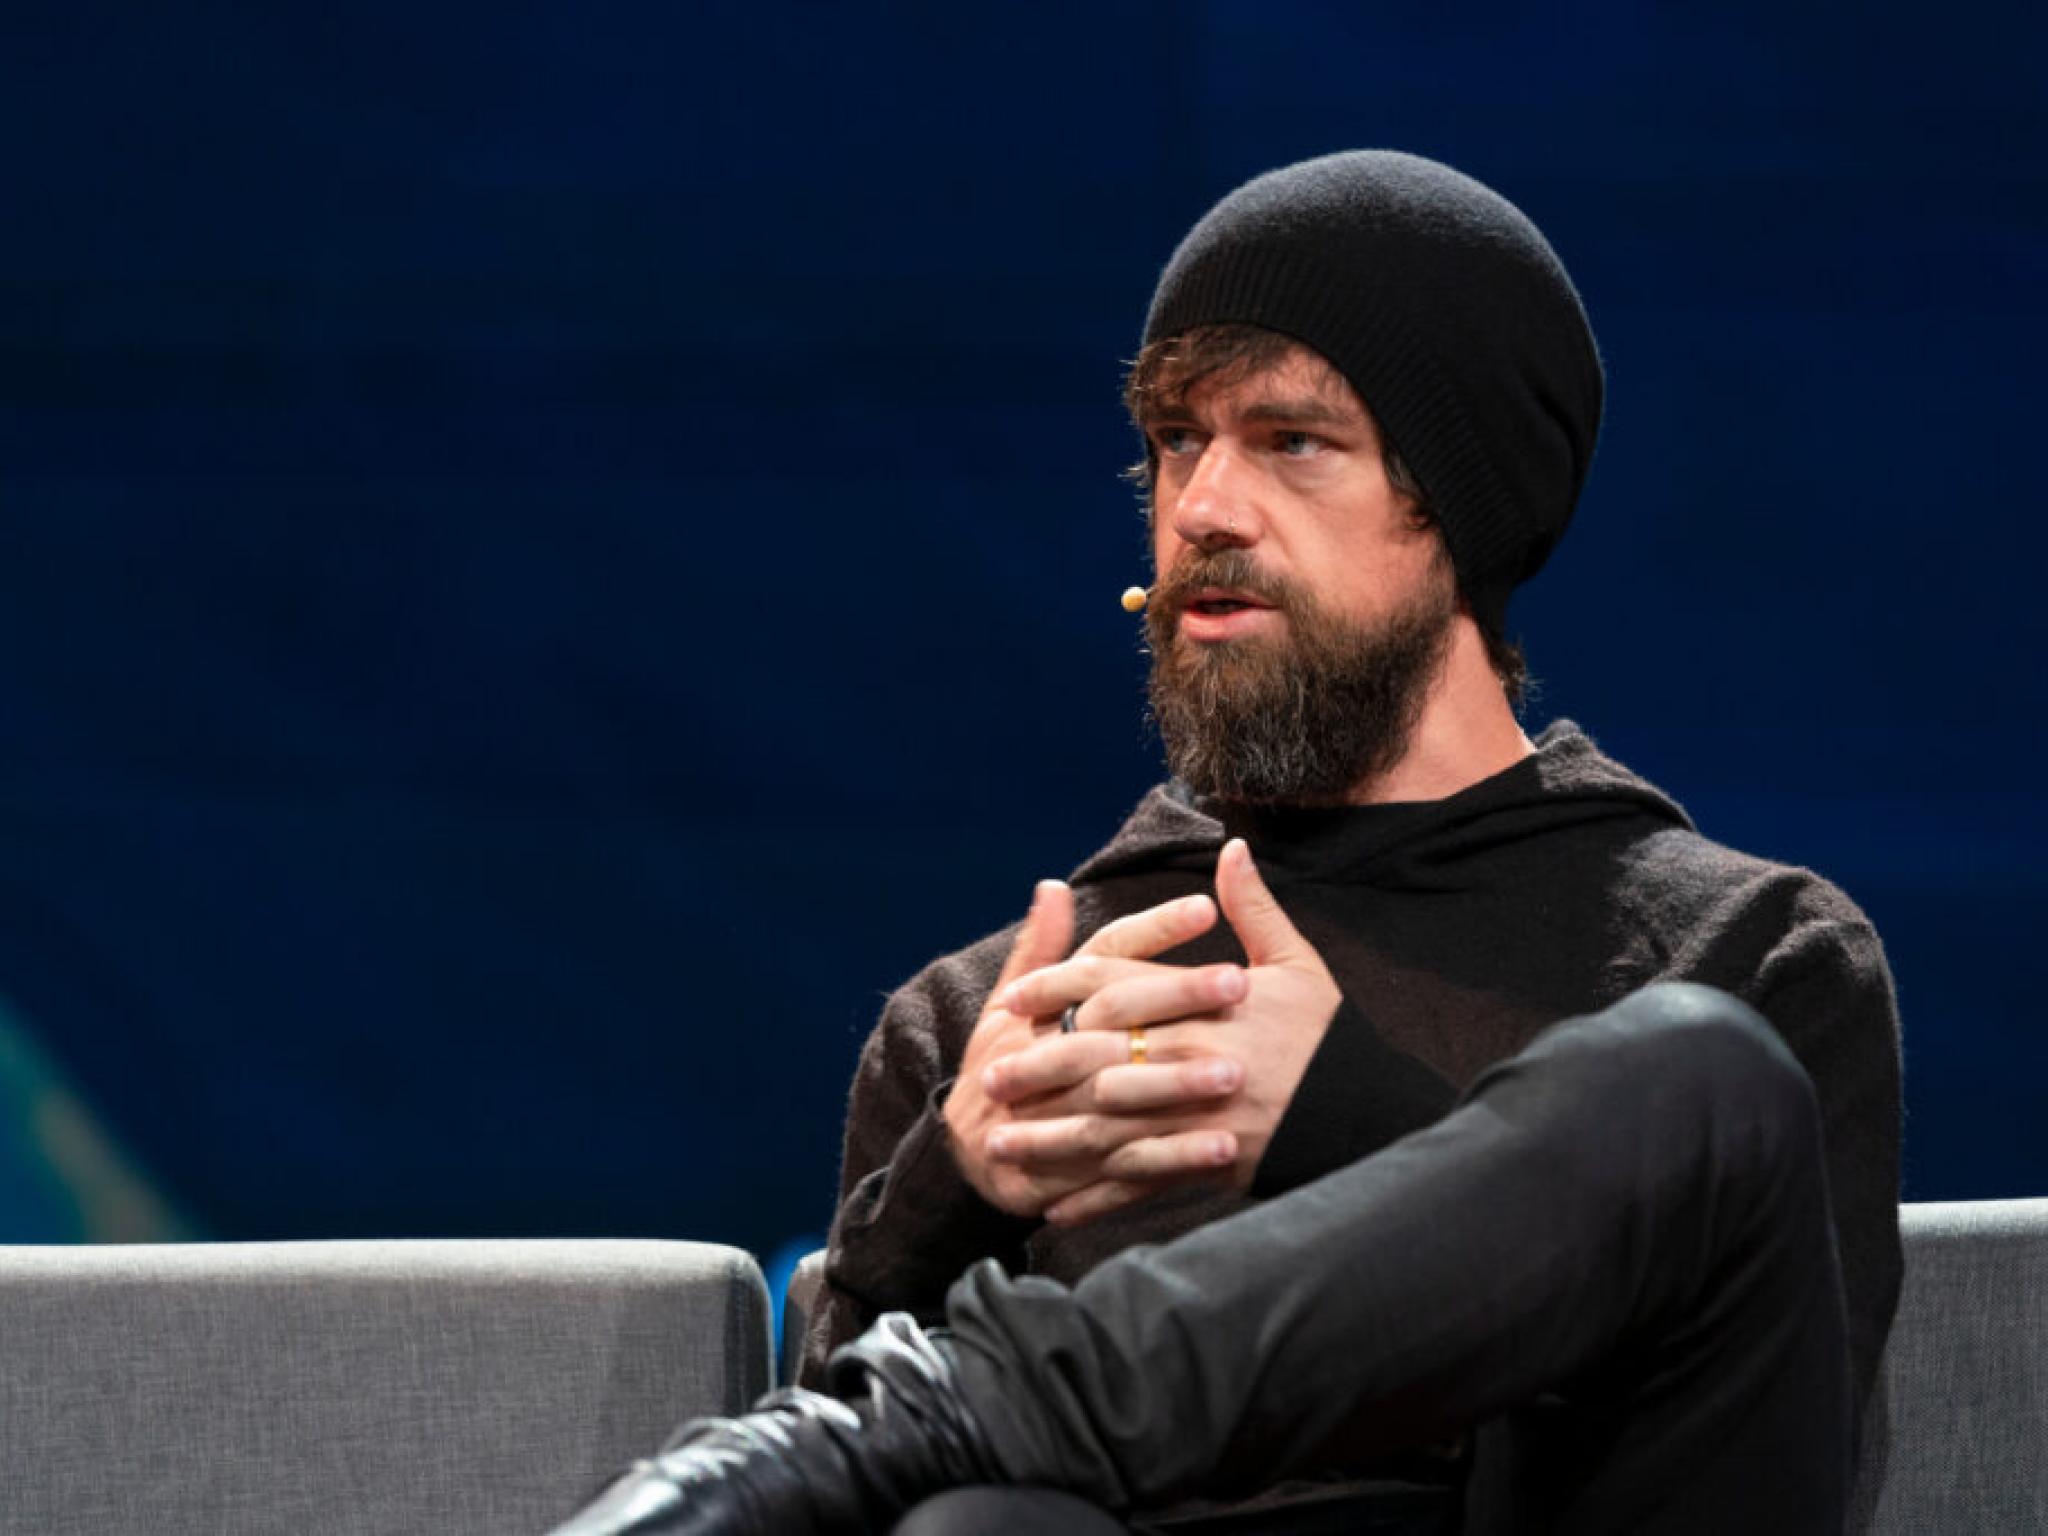  jack-dorsey-reacts-to-elon-musks-call-for-peace-and-space-exploration-amid-israel-iran-conflict-escalation 